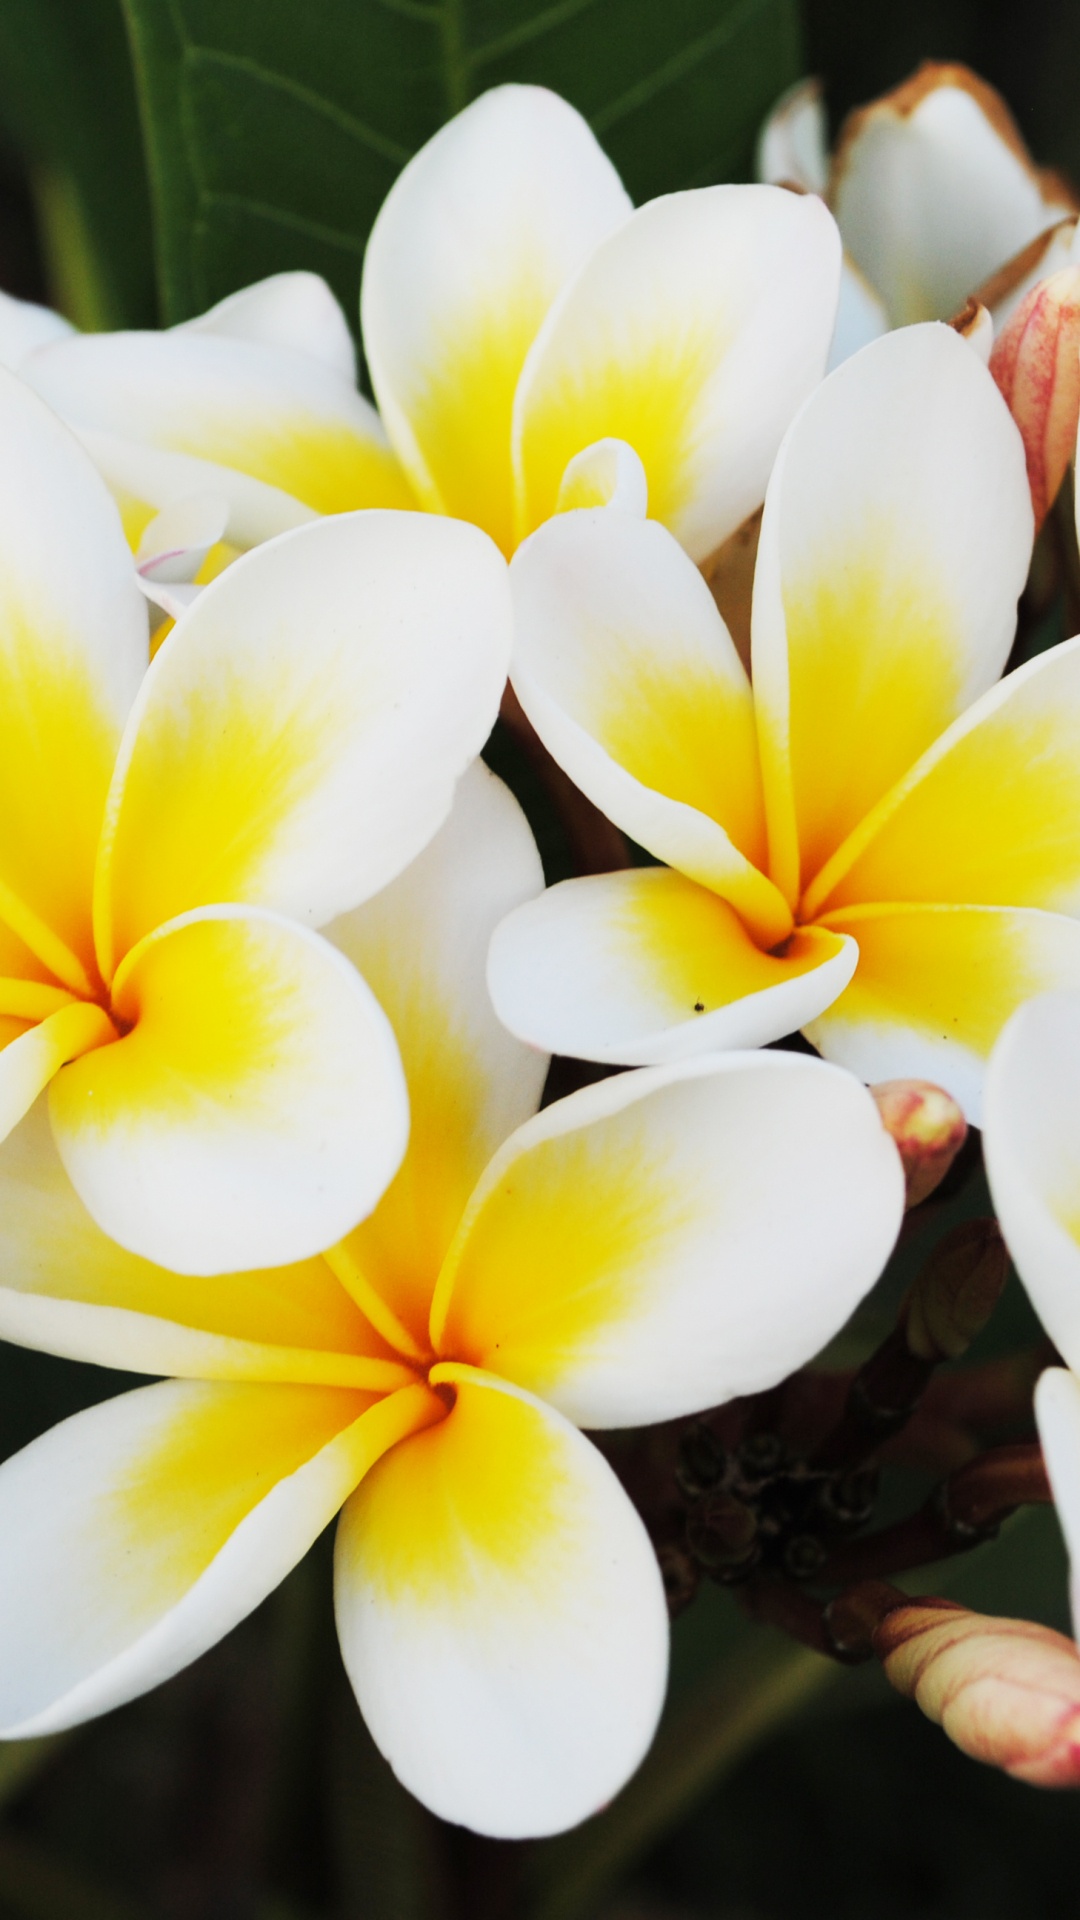 White and Yellow Flower in Close up Photography. Wallpaper in 1080x1920 Resolution